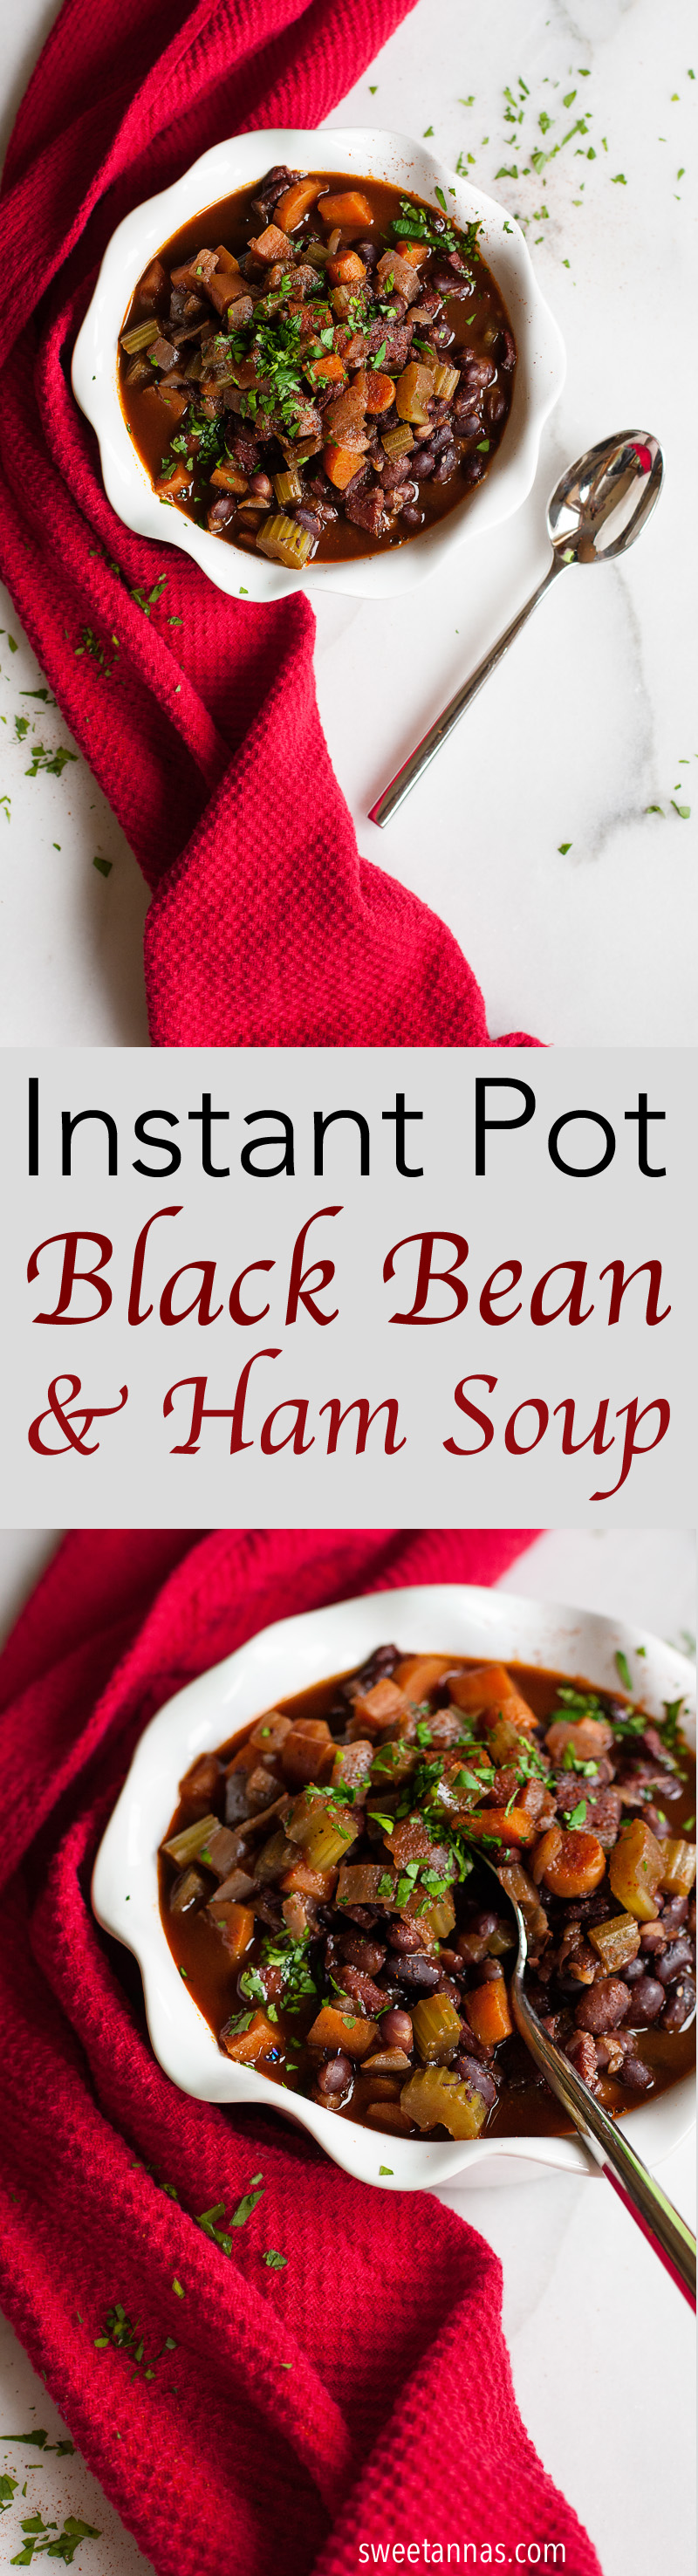 INSTANT POT Black Bean & Ham Soup! Easy, FAST and Delicious!! | www.sweetannas.com